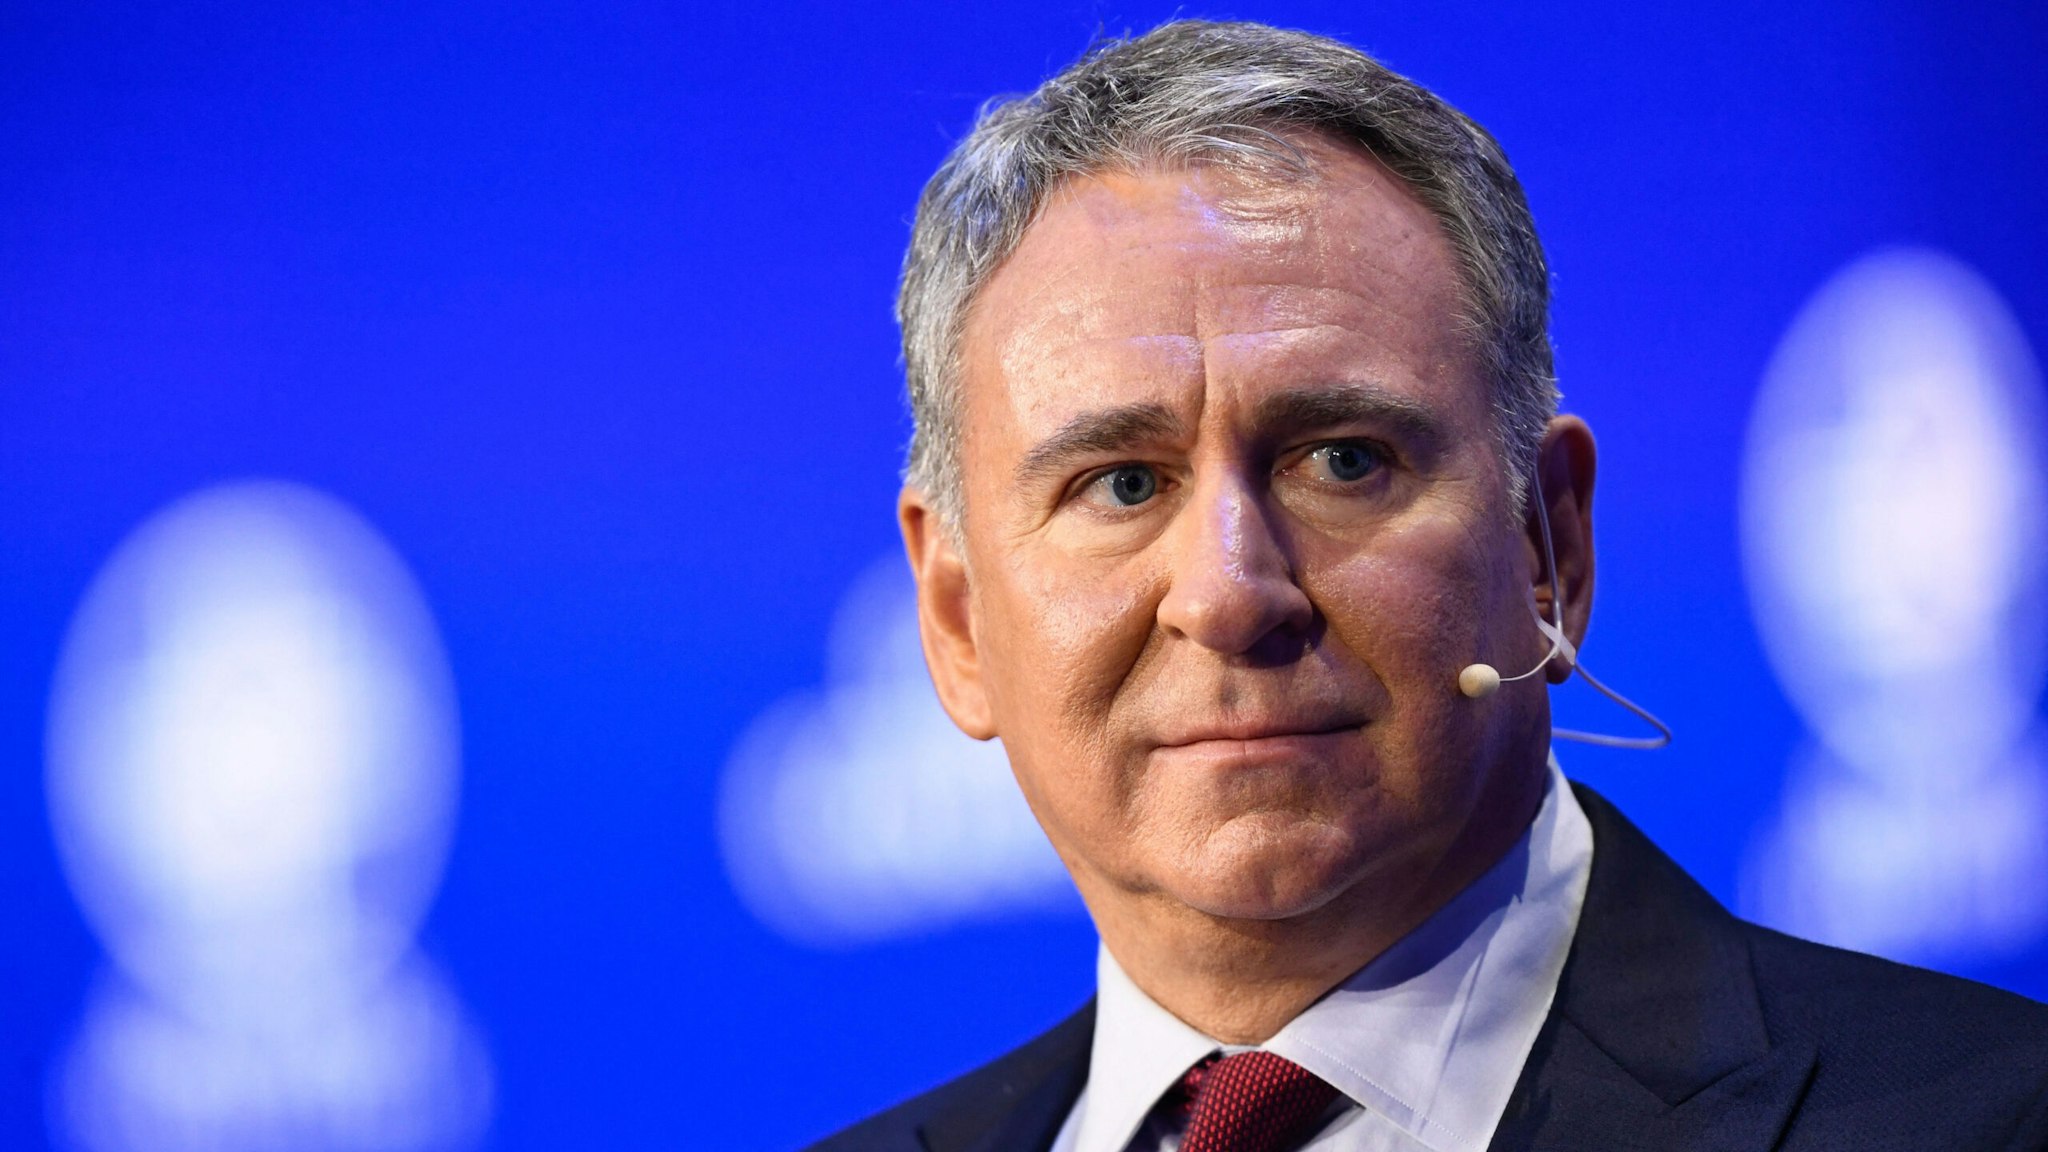 Ken Griffin, Founder and CEO, Citadel, speaks during the Milken Institute Global Conference in Beverly Hills, California, on May 2, 2022.